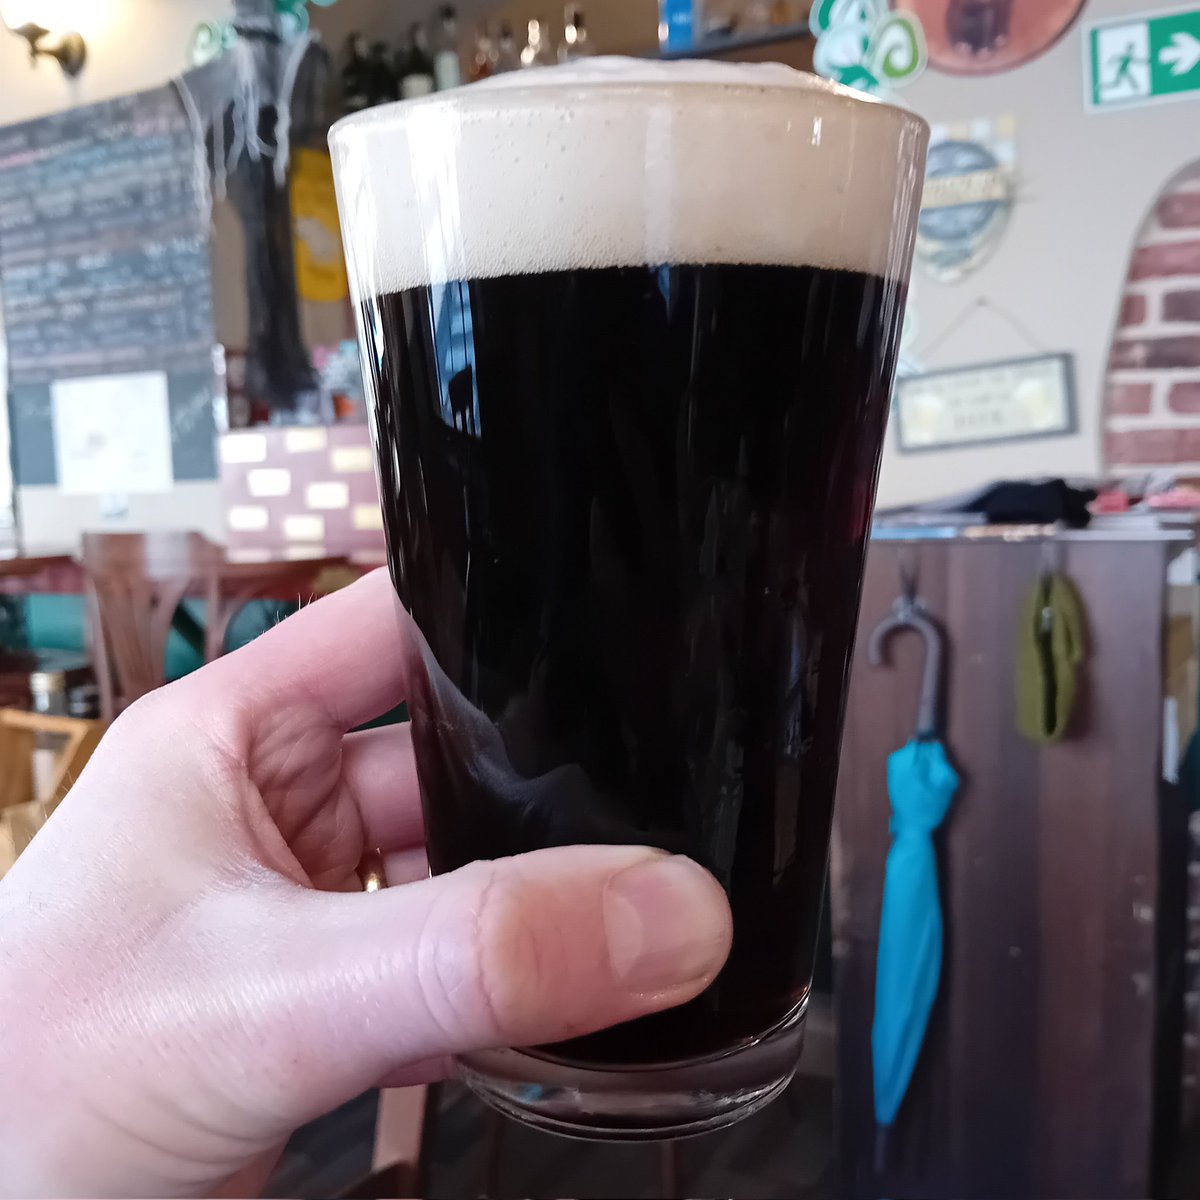 Our Blackwell Stout looking and tasting great in La Belle Alliance in Milan city centre.

#Ballykilcavan #Laois #IndependentBeer #DrinkIrish #DrinkResponsibly